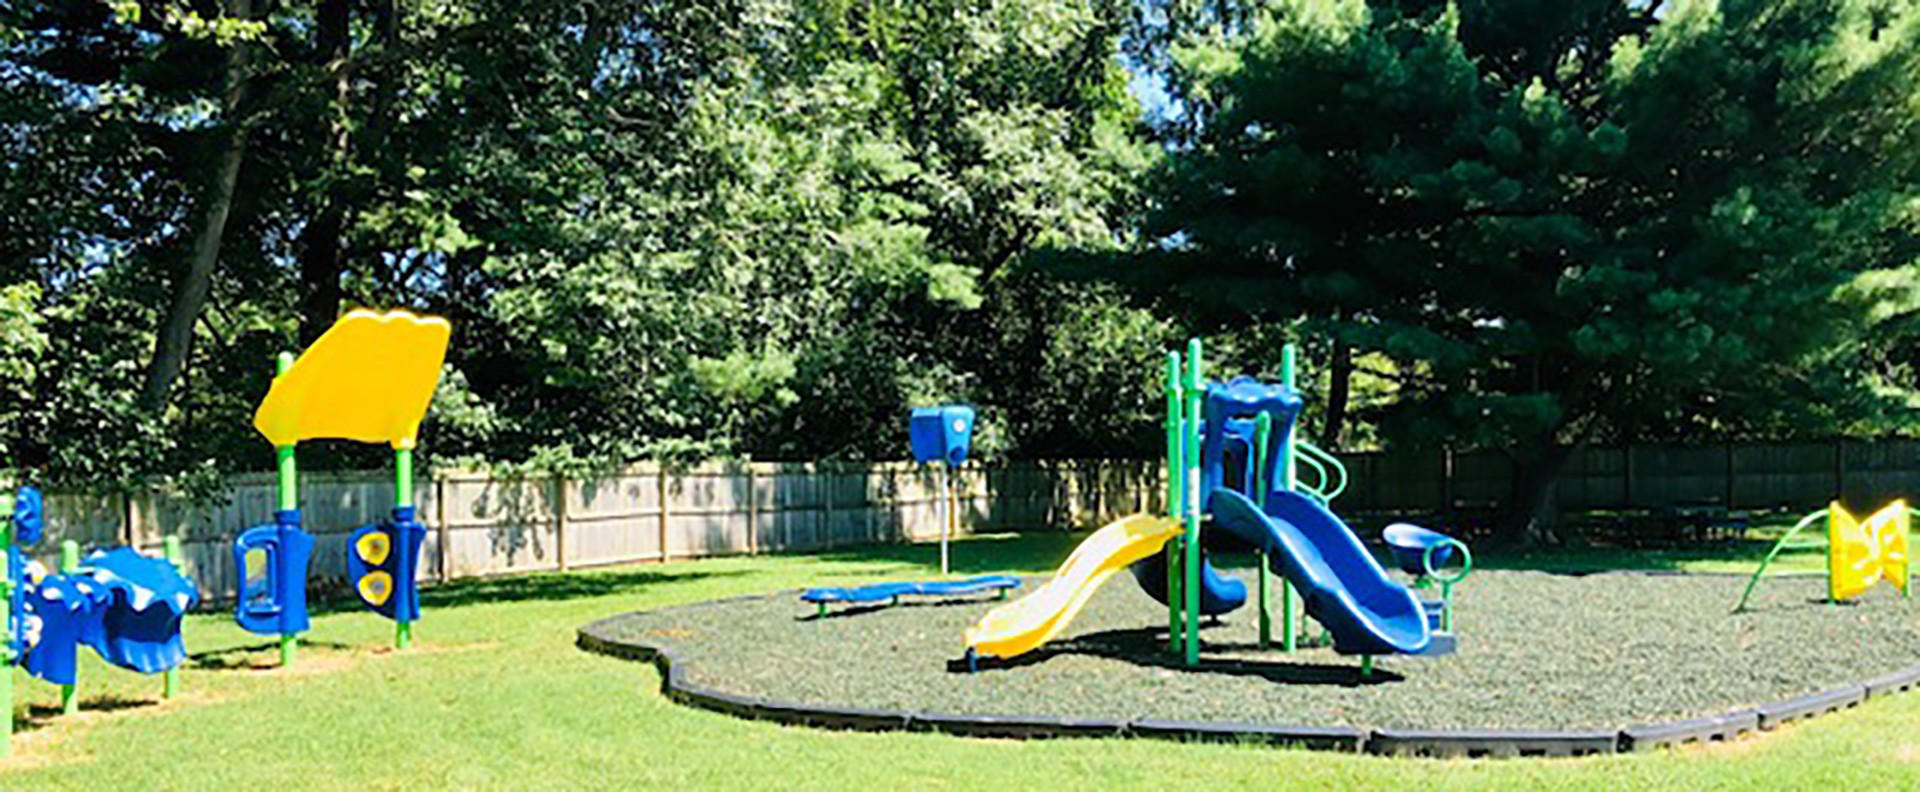 Featured image of playground with a blue slide during the summer and trees in background